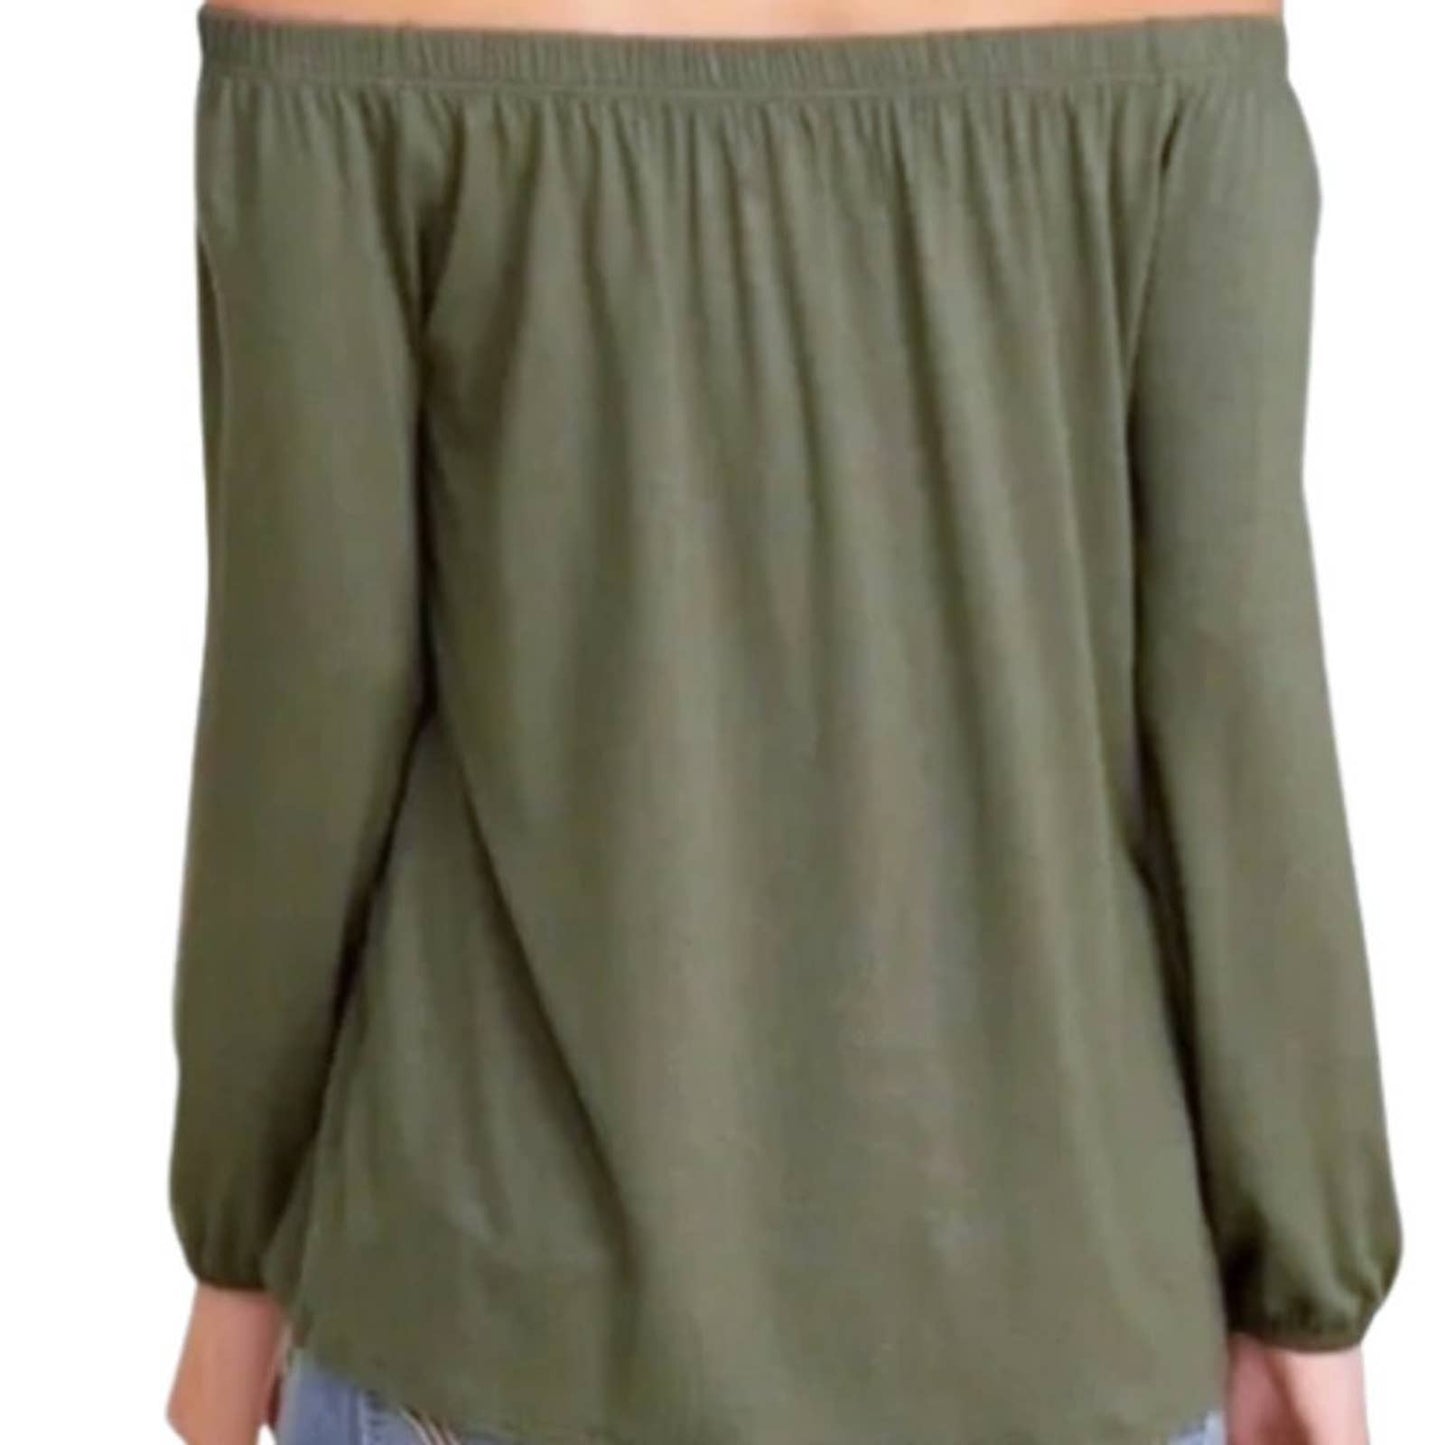 Hollister Off Shoulder Peasant Top in Olive Green Size Small